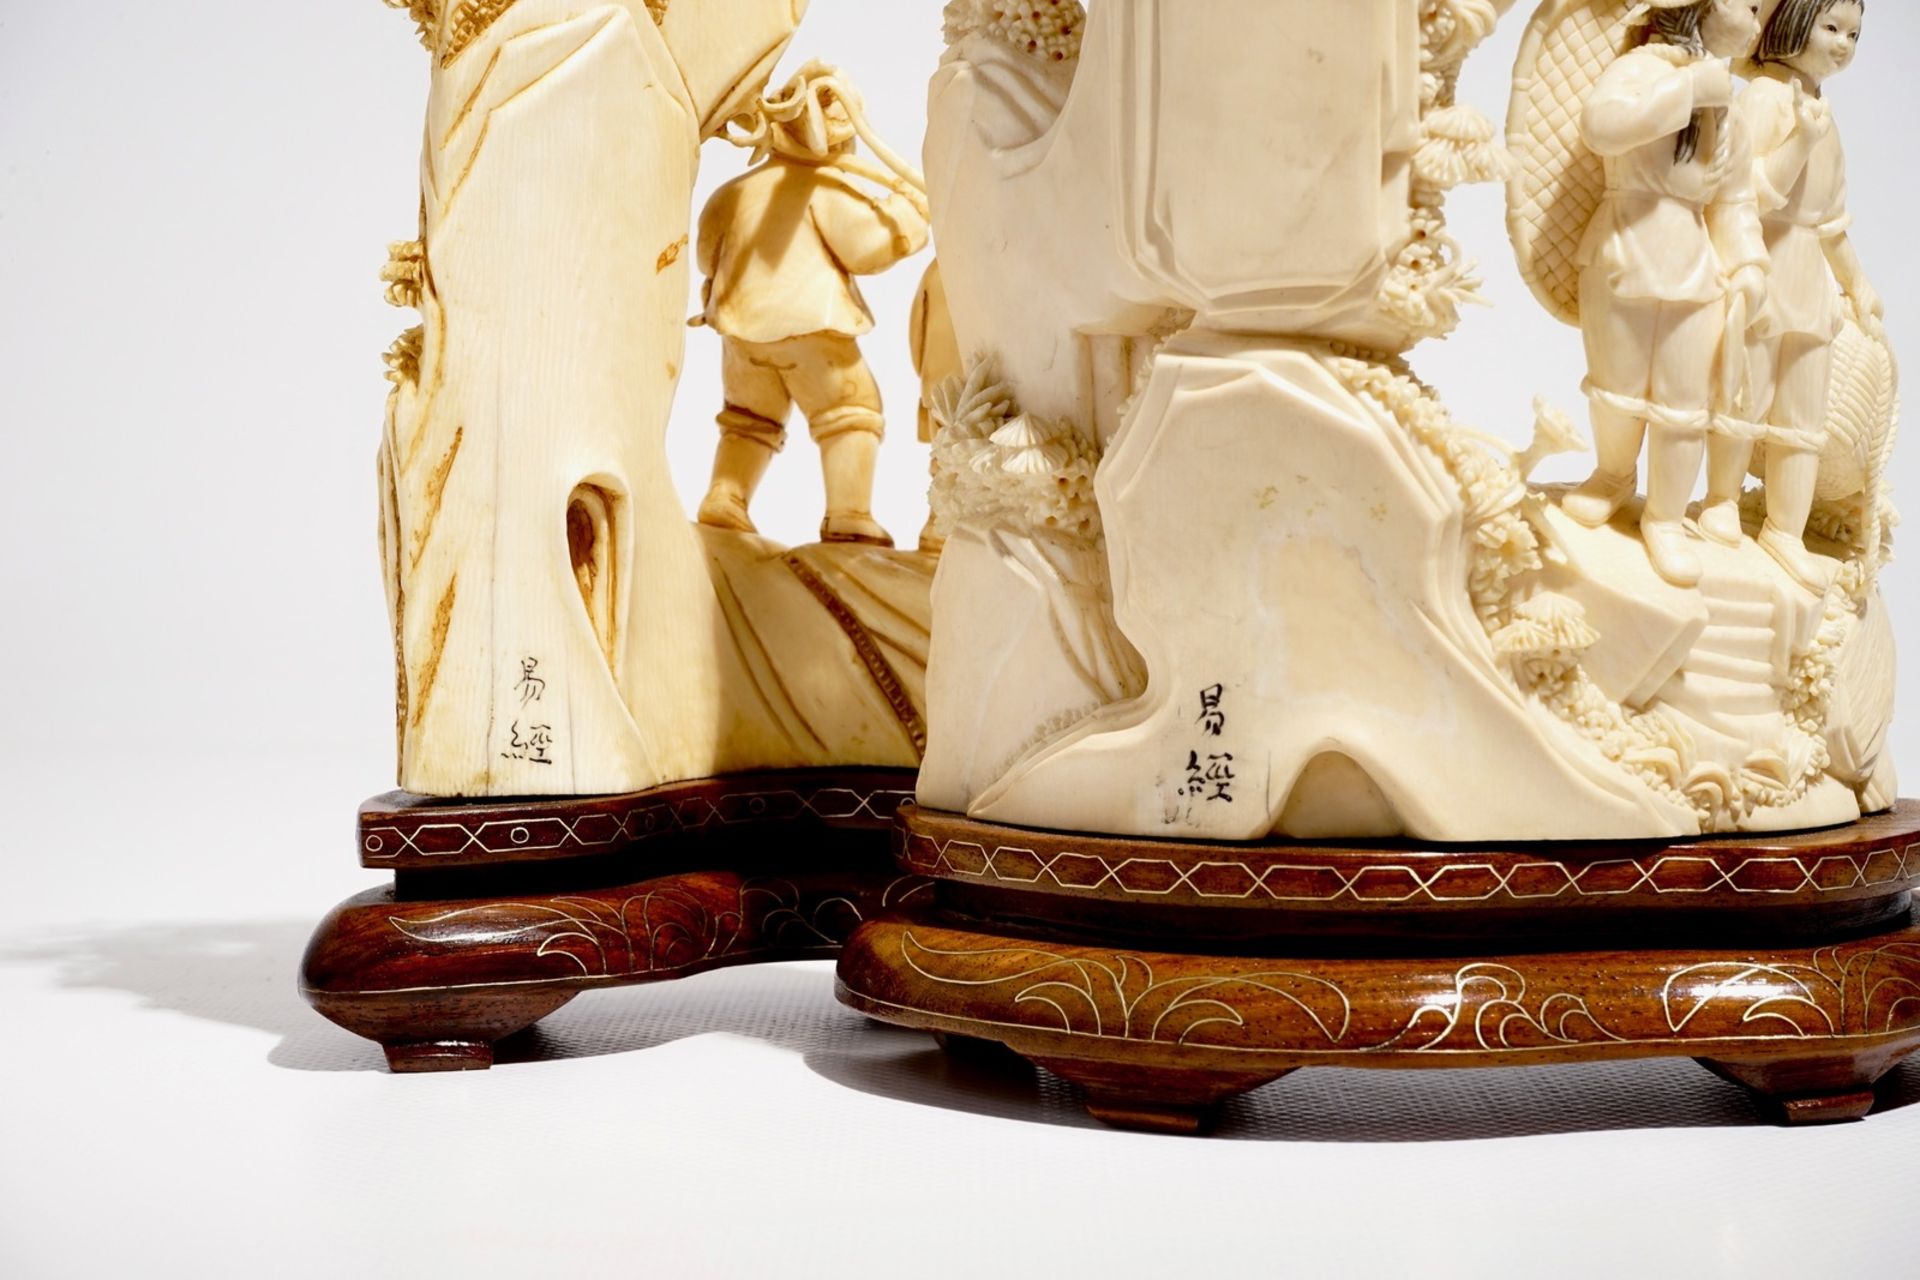 Two Chinese carved ivory groups on wooden base, 2nd quarter 20th C. - Image 8 of 8